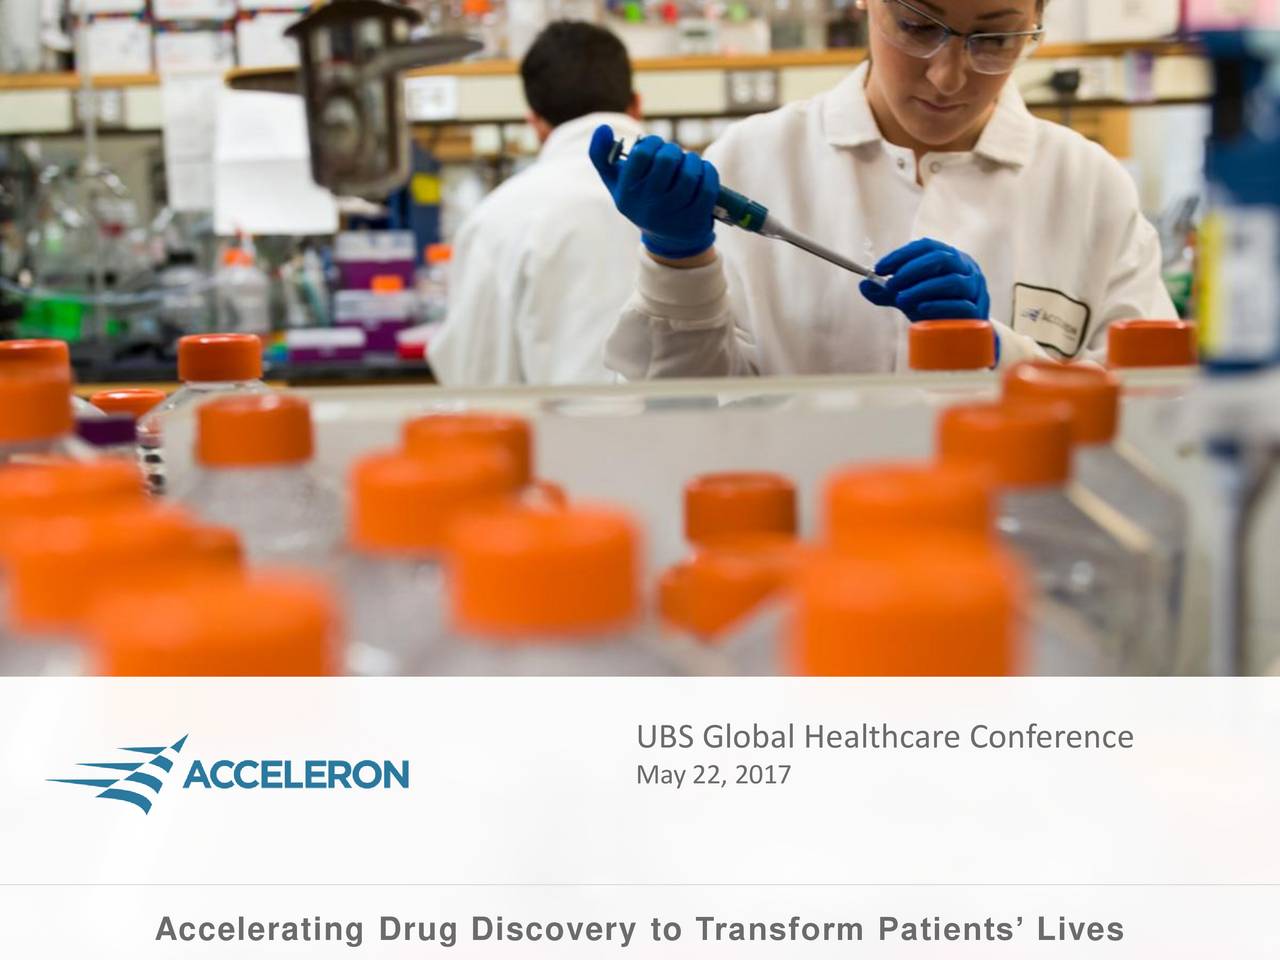 Acceleron Pharma (XLRN) Presents At UBS Global Healthcare Conference